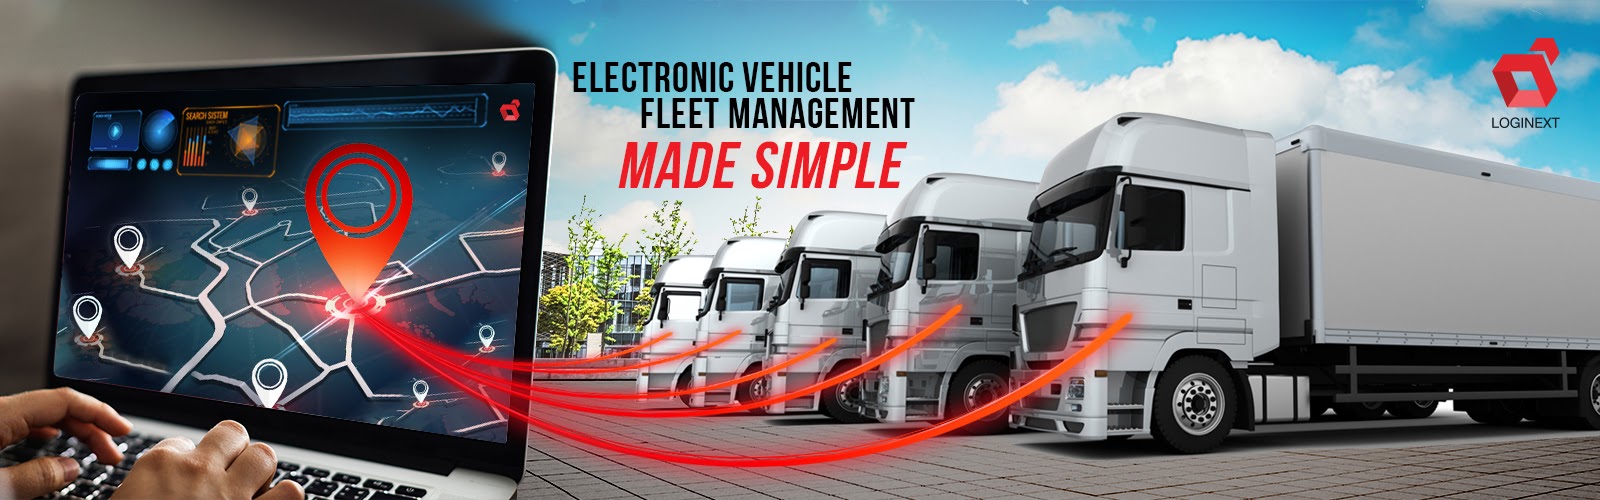 Electric Vehicle Fleet Management Made Simple for the New Age of Transportation